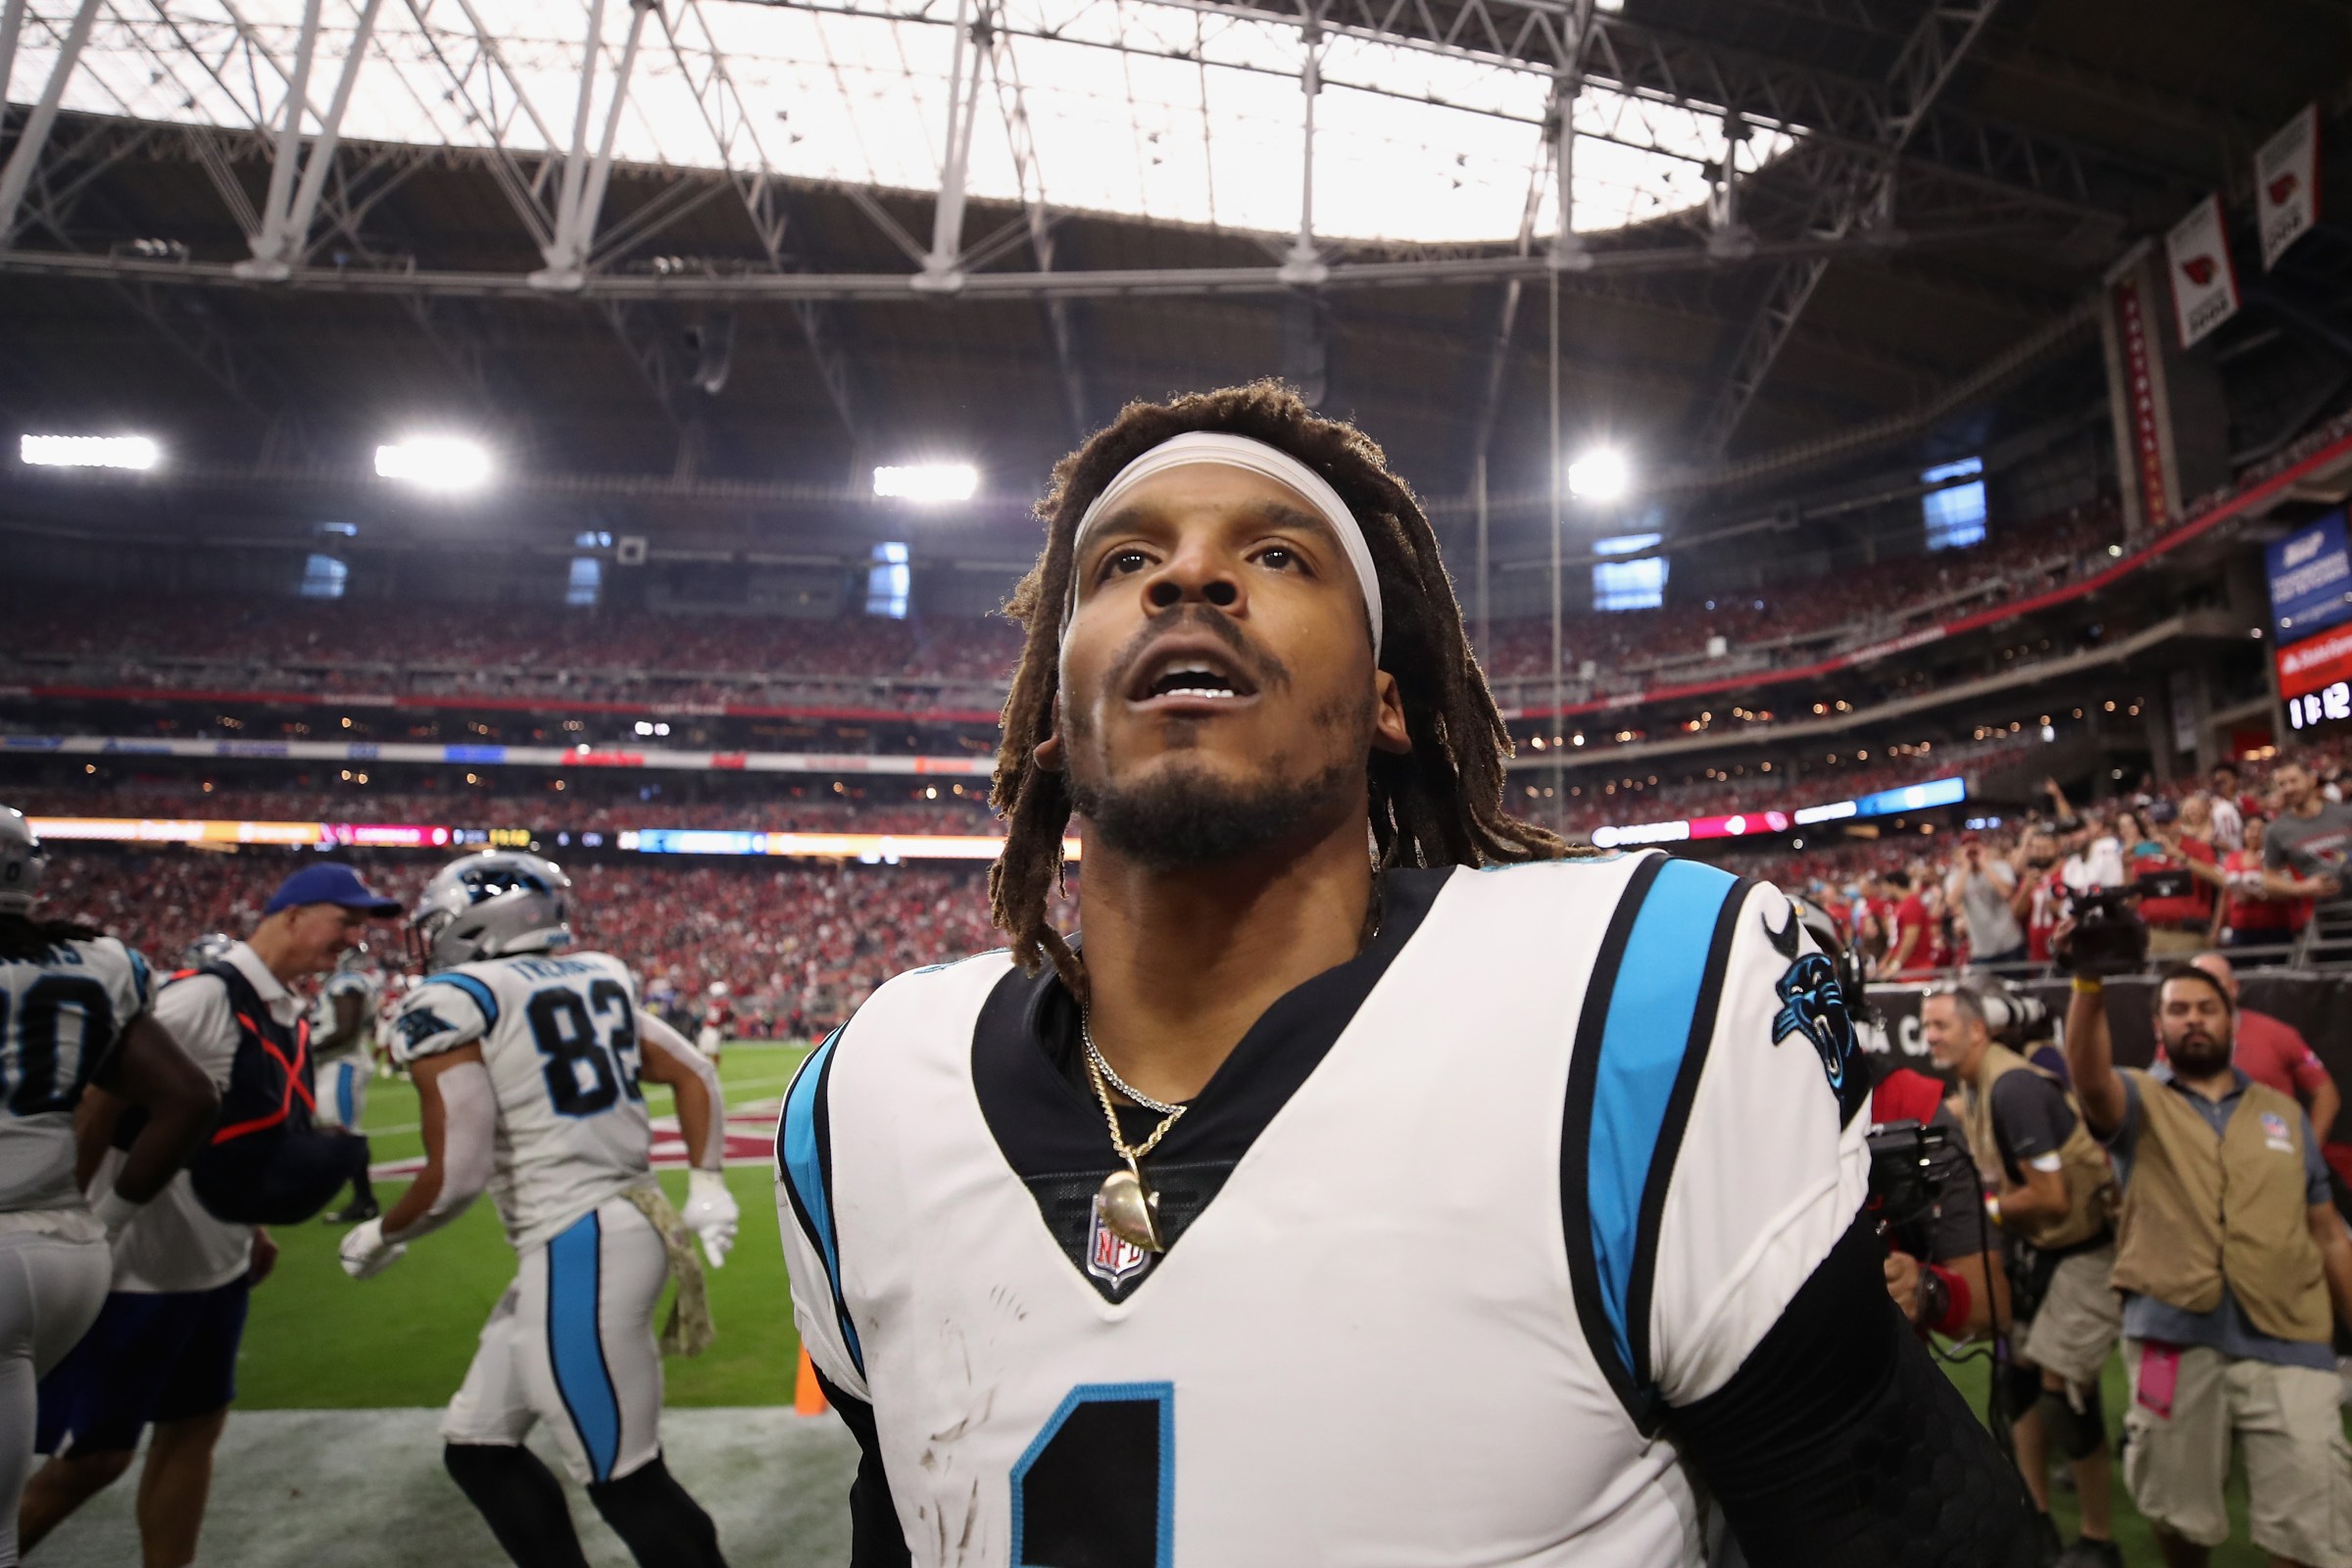 Quarterback Cam Newton #1 of the Carolina Panthers reacts after scoring on a 2-yard rushing touchdown against the Arizona Cardinals during the first quarter of the NFL game at State Farm Stadium on November 14, 2021 in Glendale, Arizona. The Panthers defeated the Cardinals 34-10.